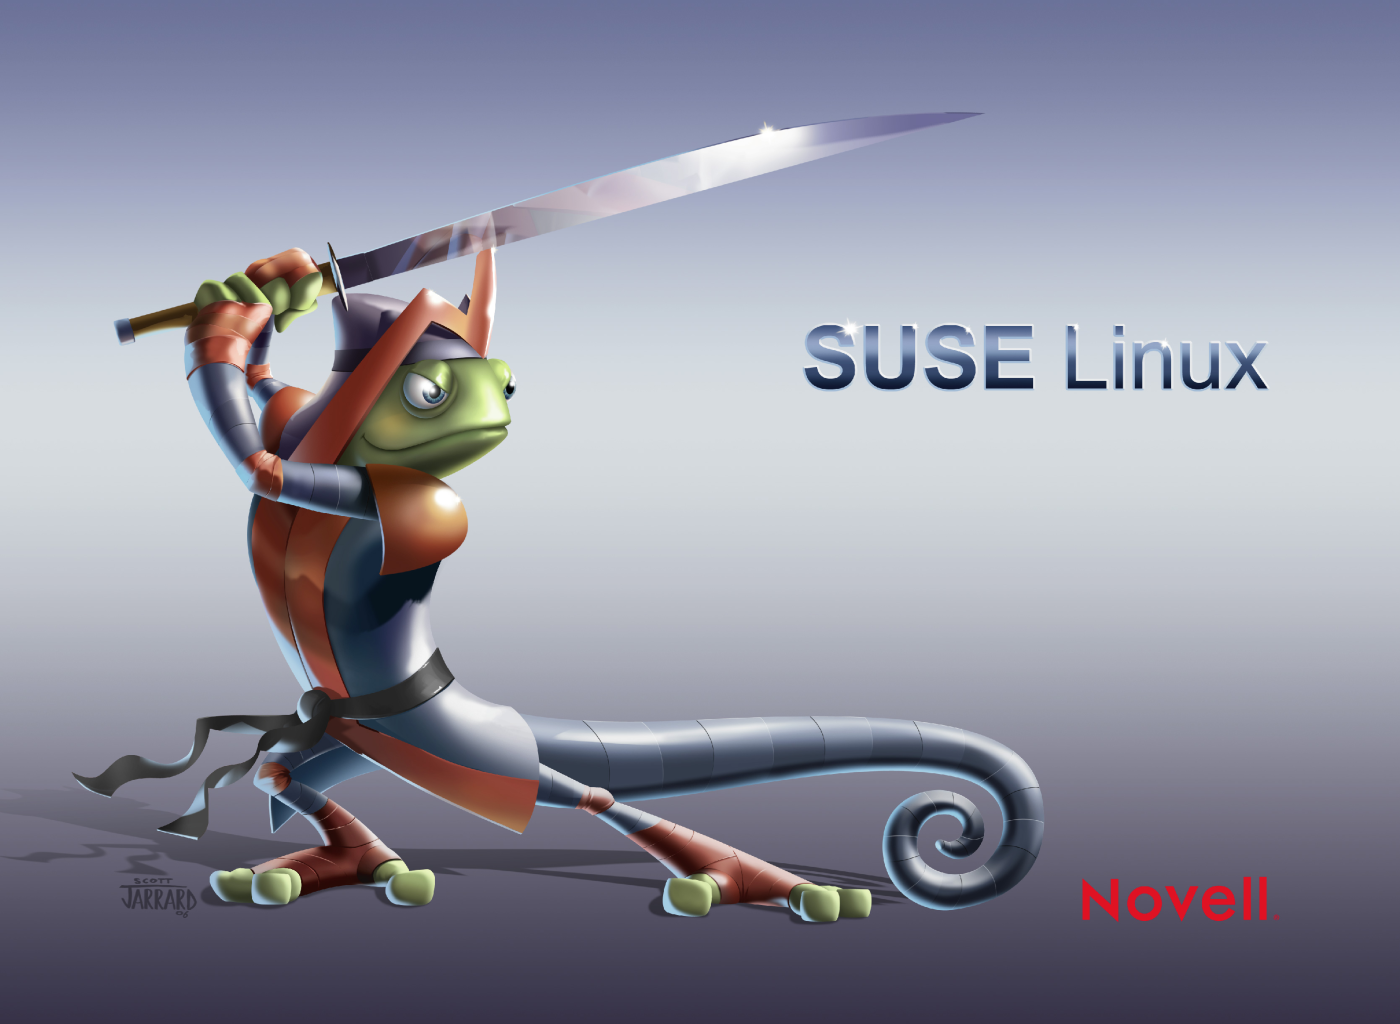 SUSE Wallpaper #2. Posted on August 14, 2006 by Ted Haeger